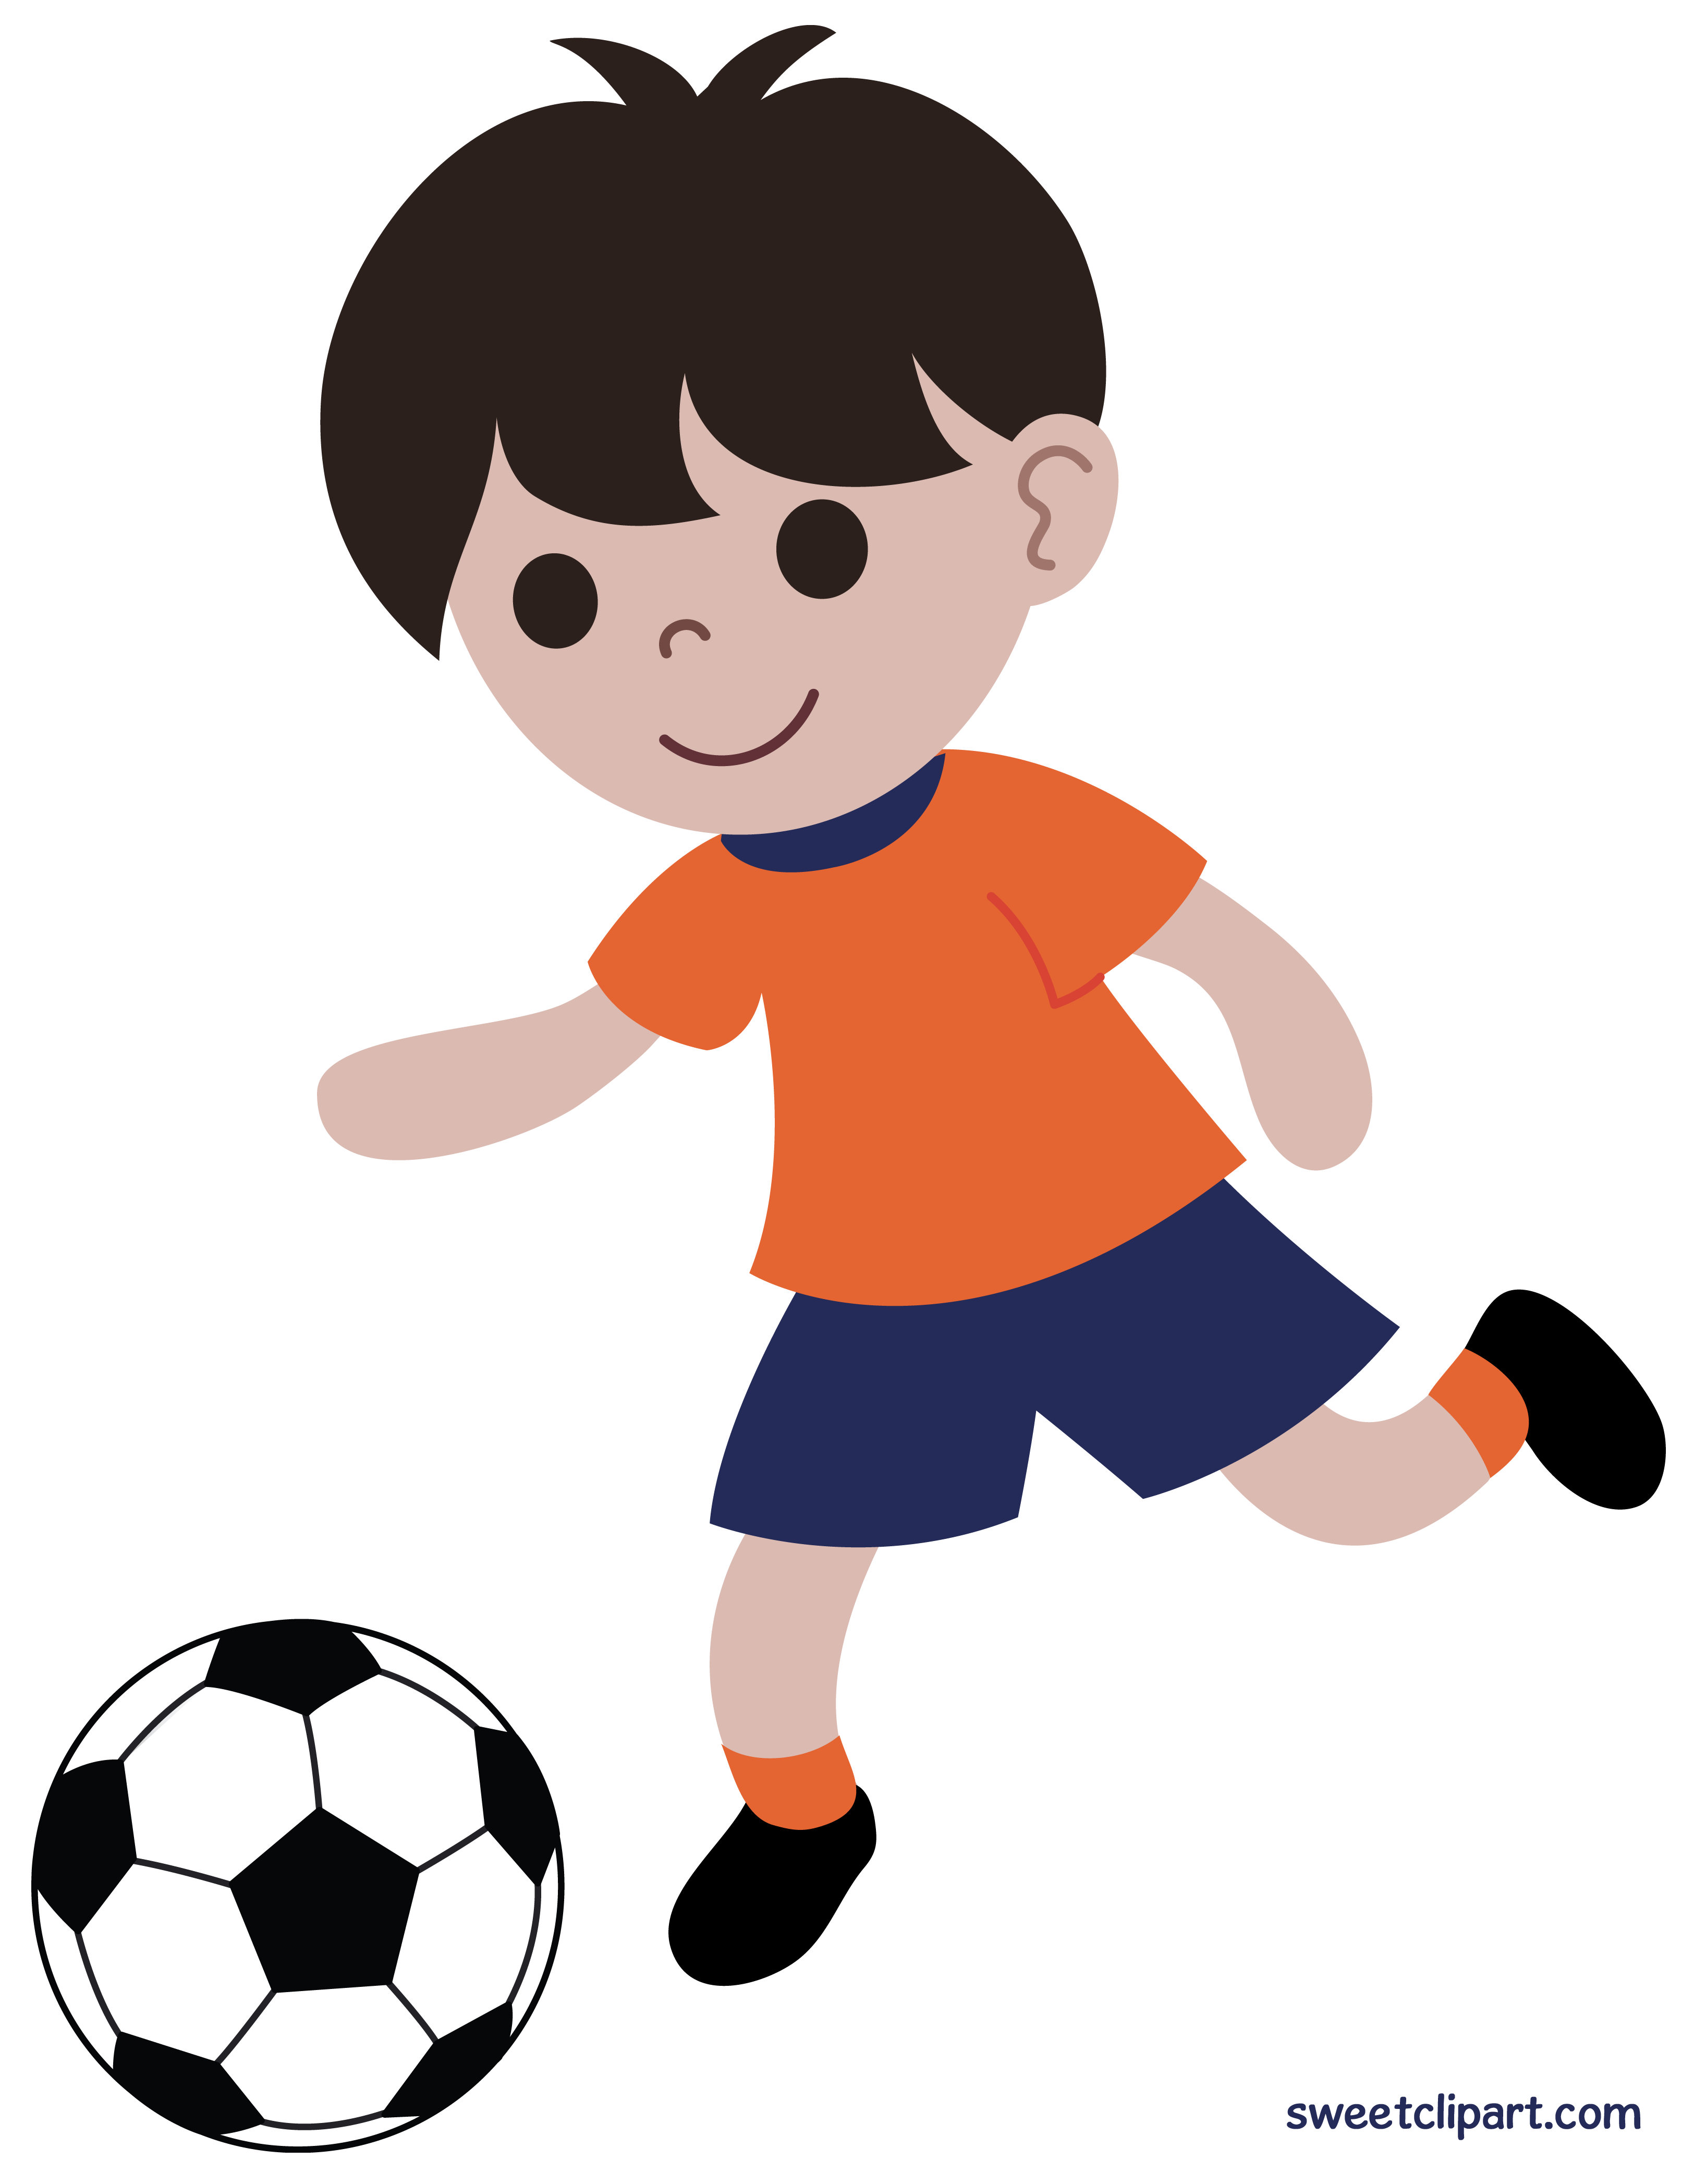 Clipboard clipart sport. Boy playing soccer or